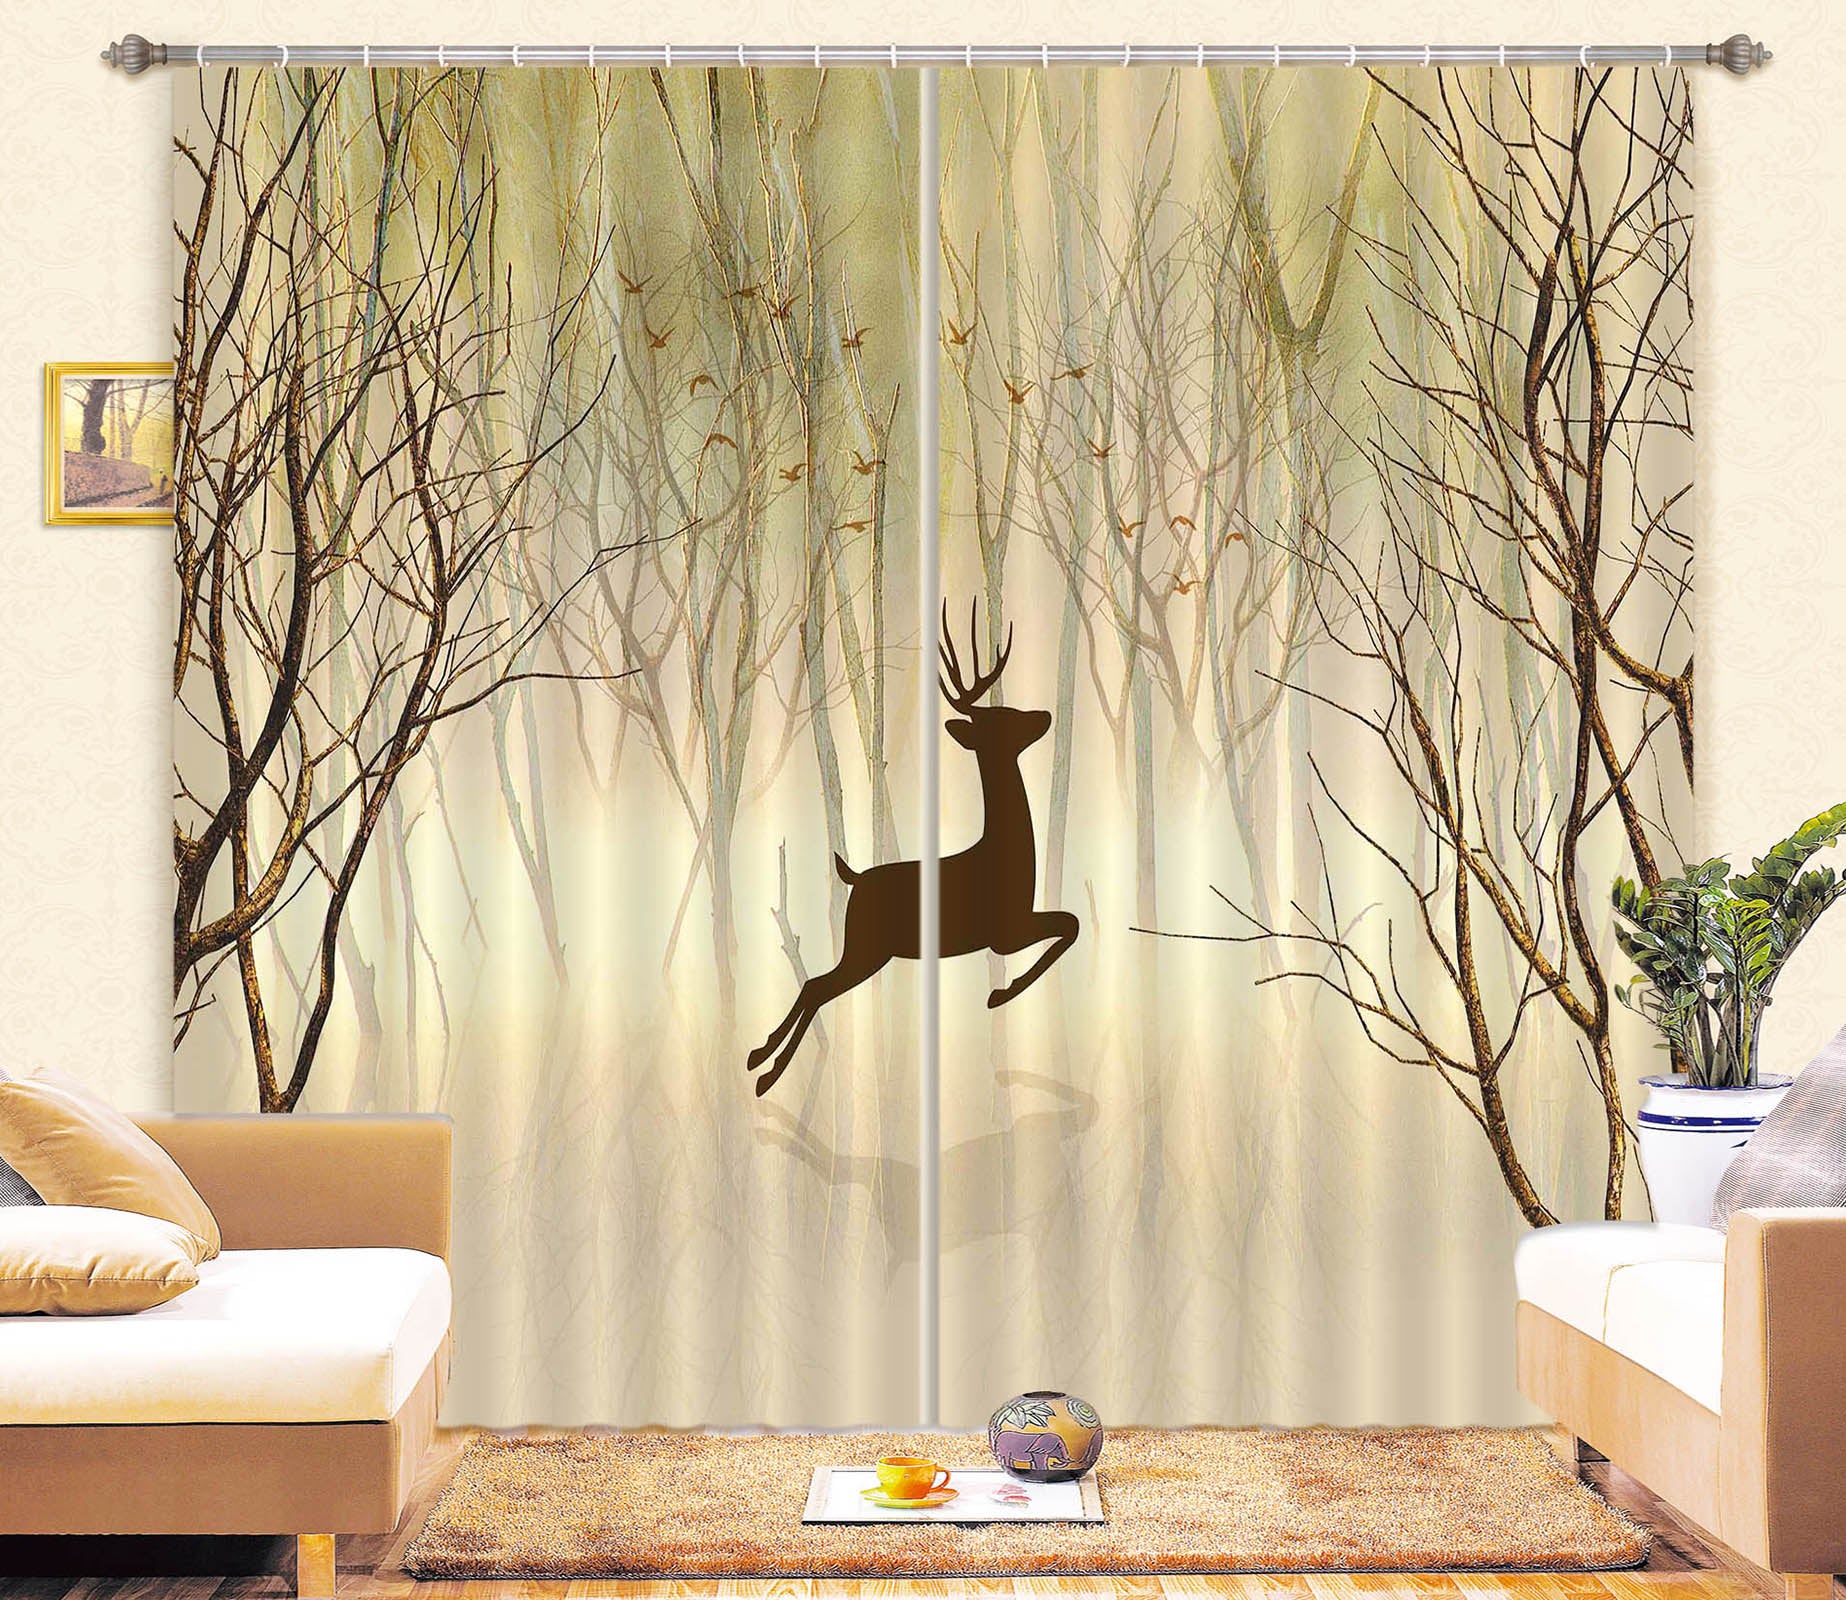 3D Jumping Fawn 739 Curtains Drapes